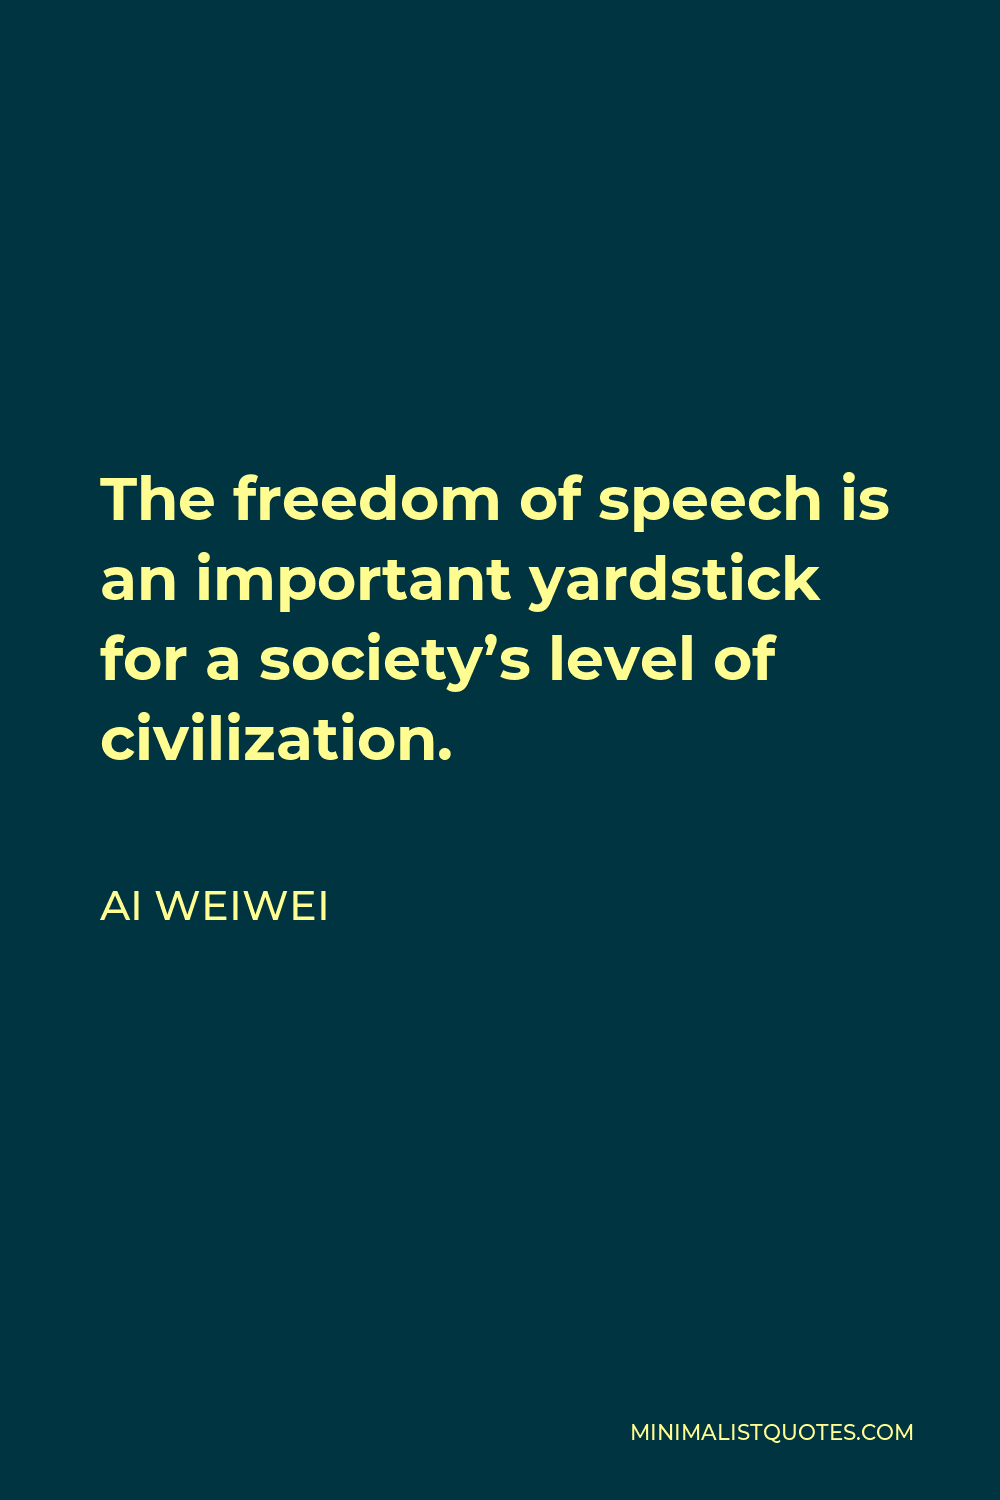 Ai Weiwei Quote - The freedom of speech is an important yardstick for a society’s level of civilization.